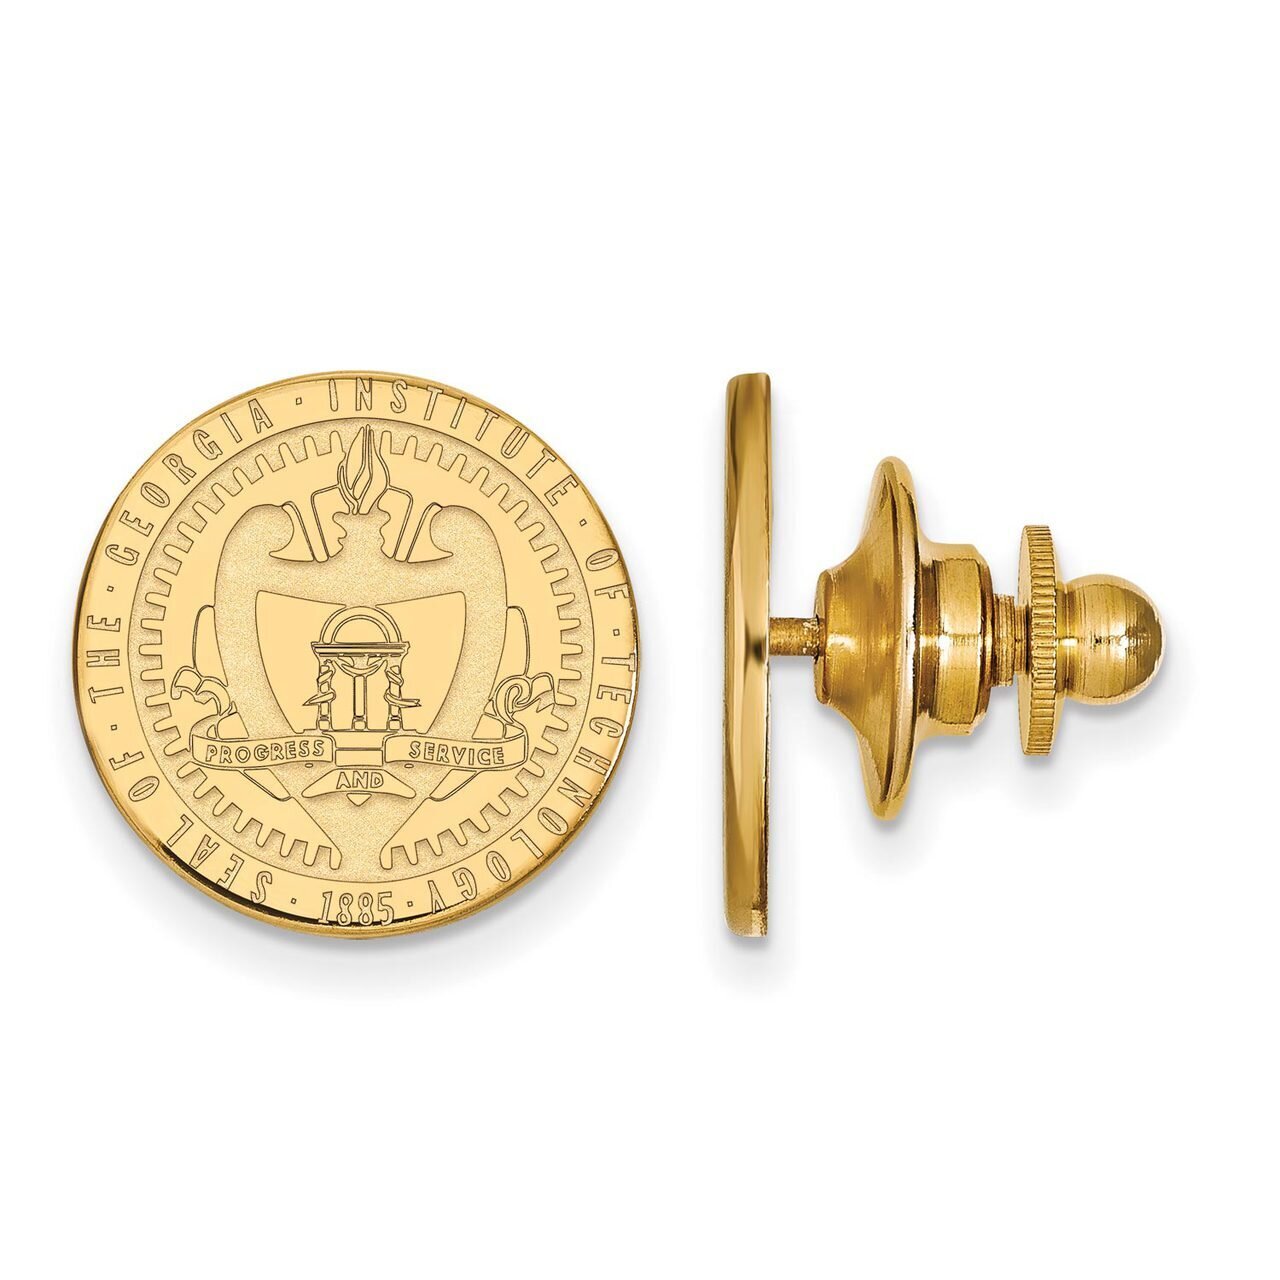 Georgia Institute of Technology Crest Lapel Pin Gold-plated Silver GP057GT